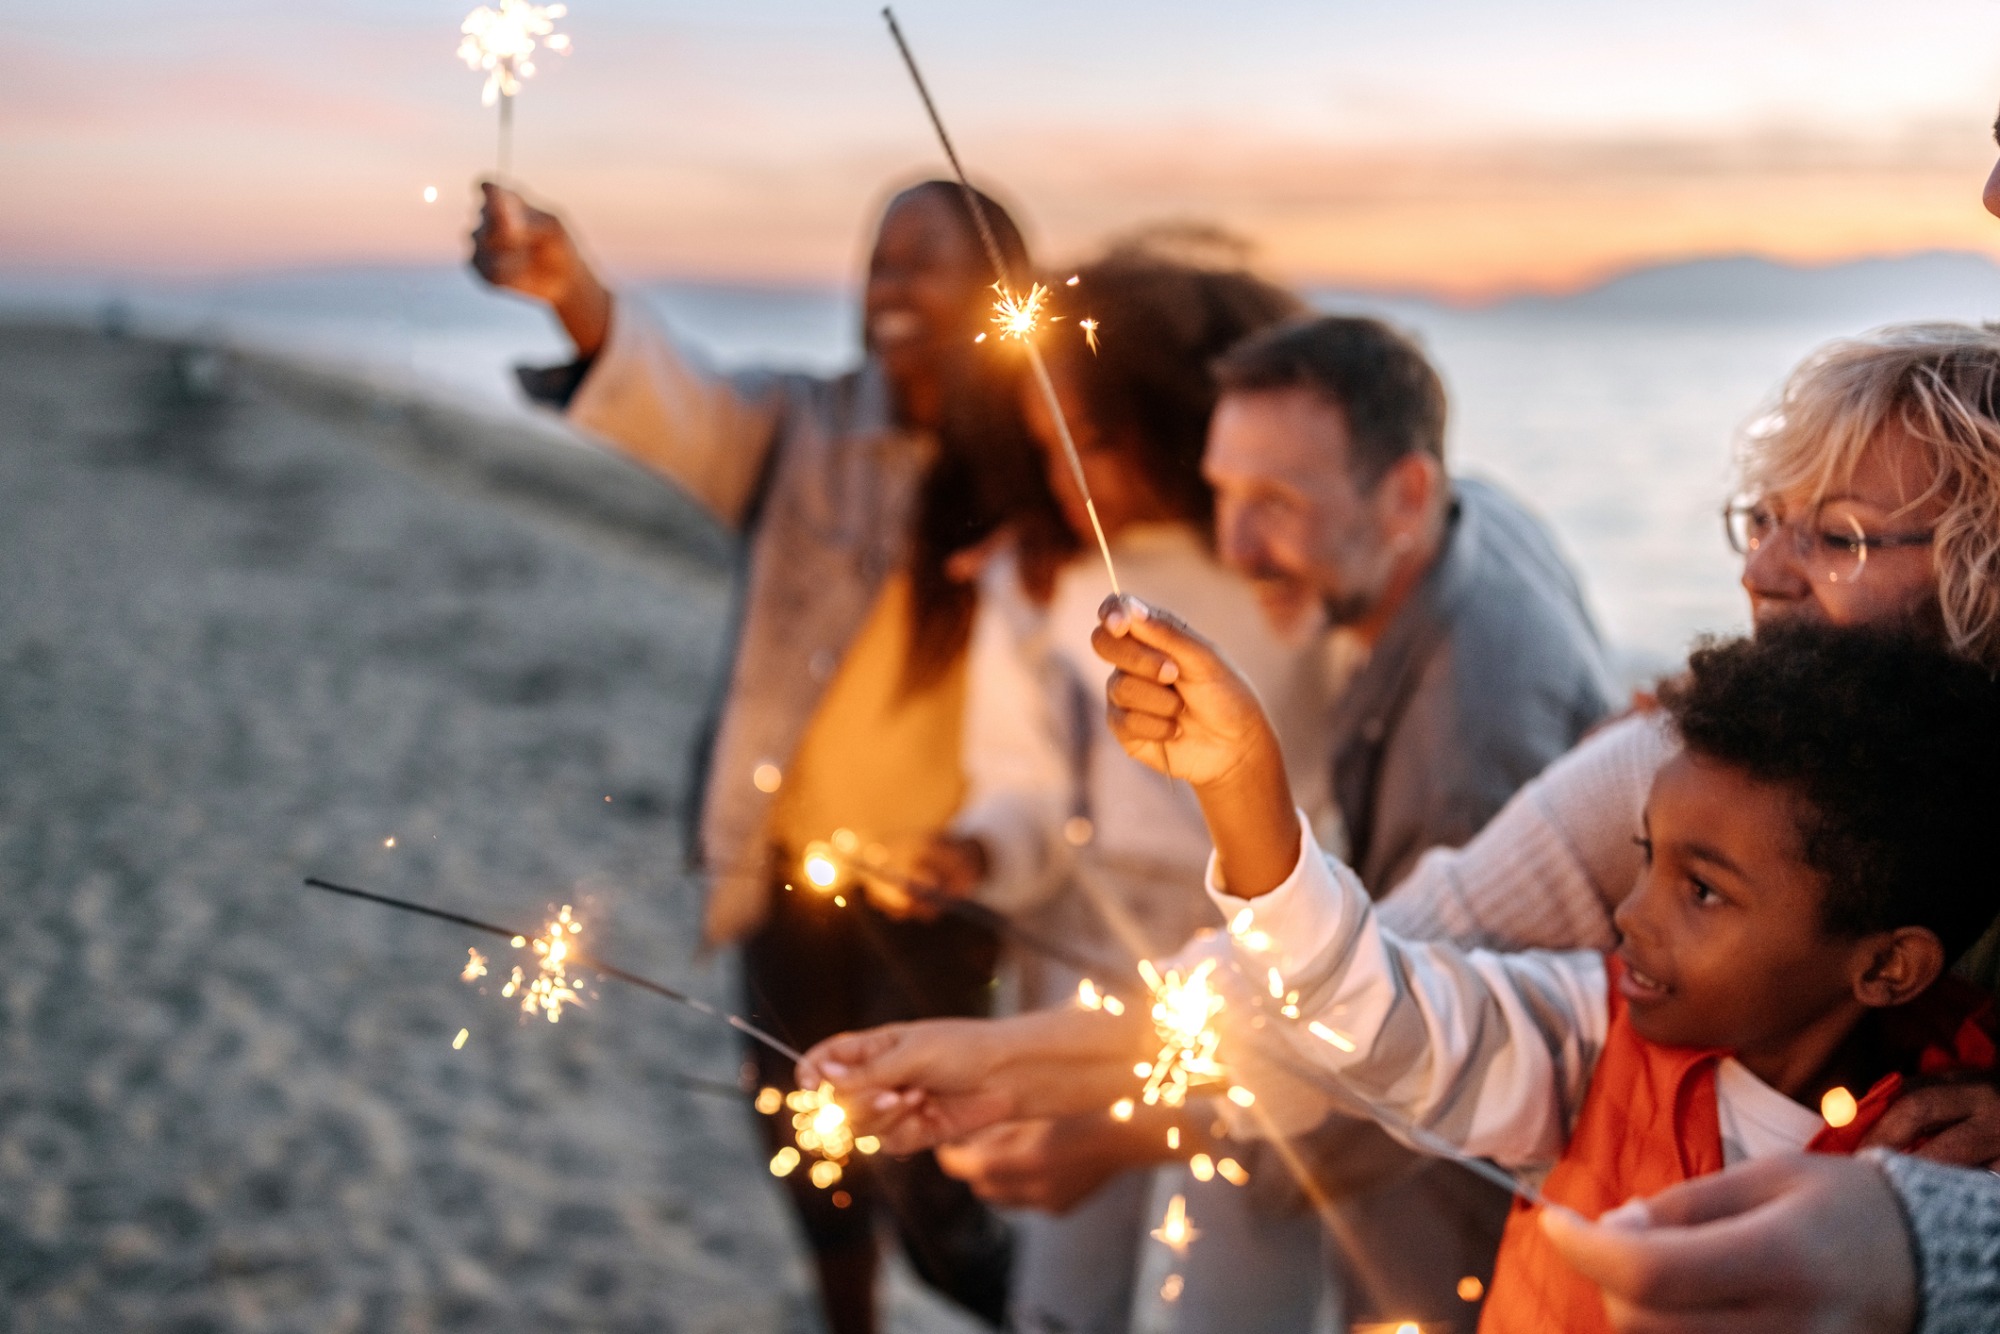 Group of people on a beach with lit sparklers